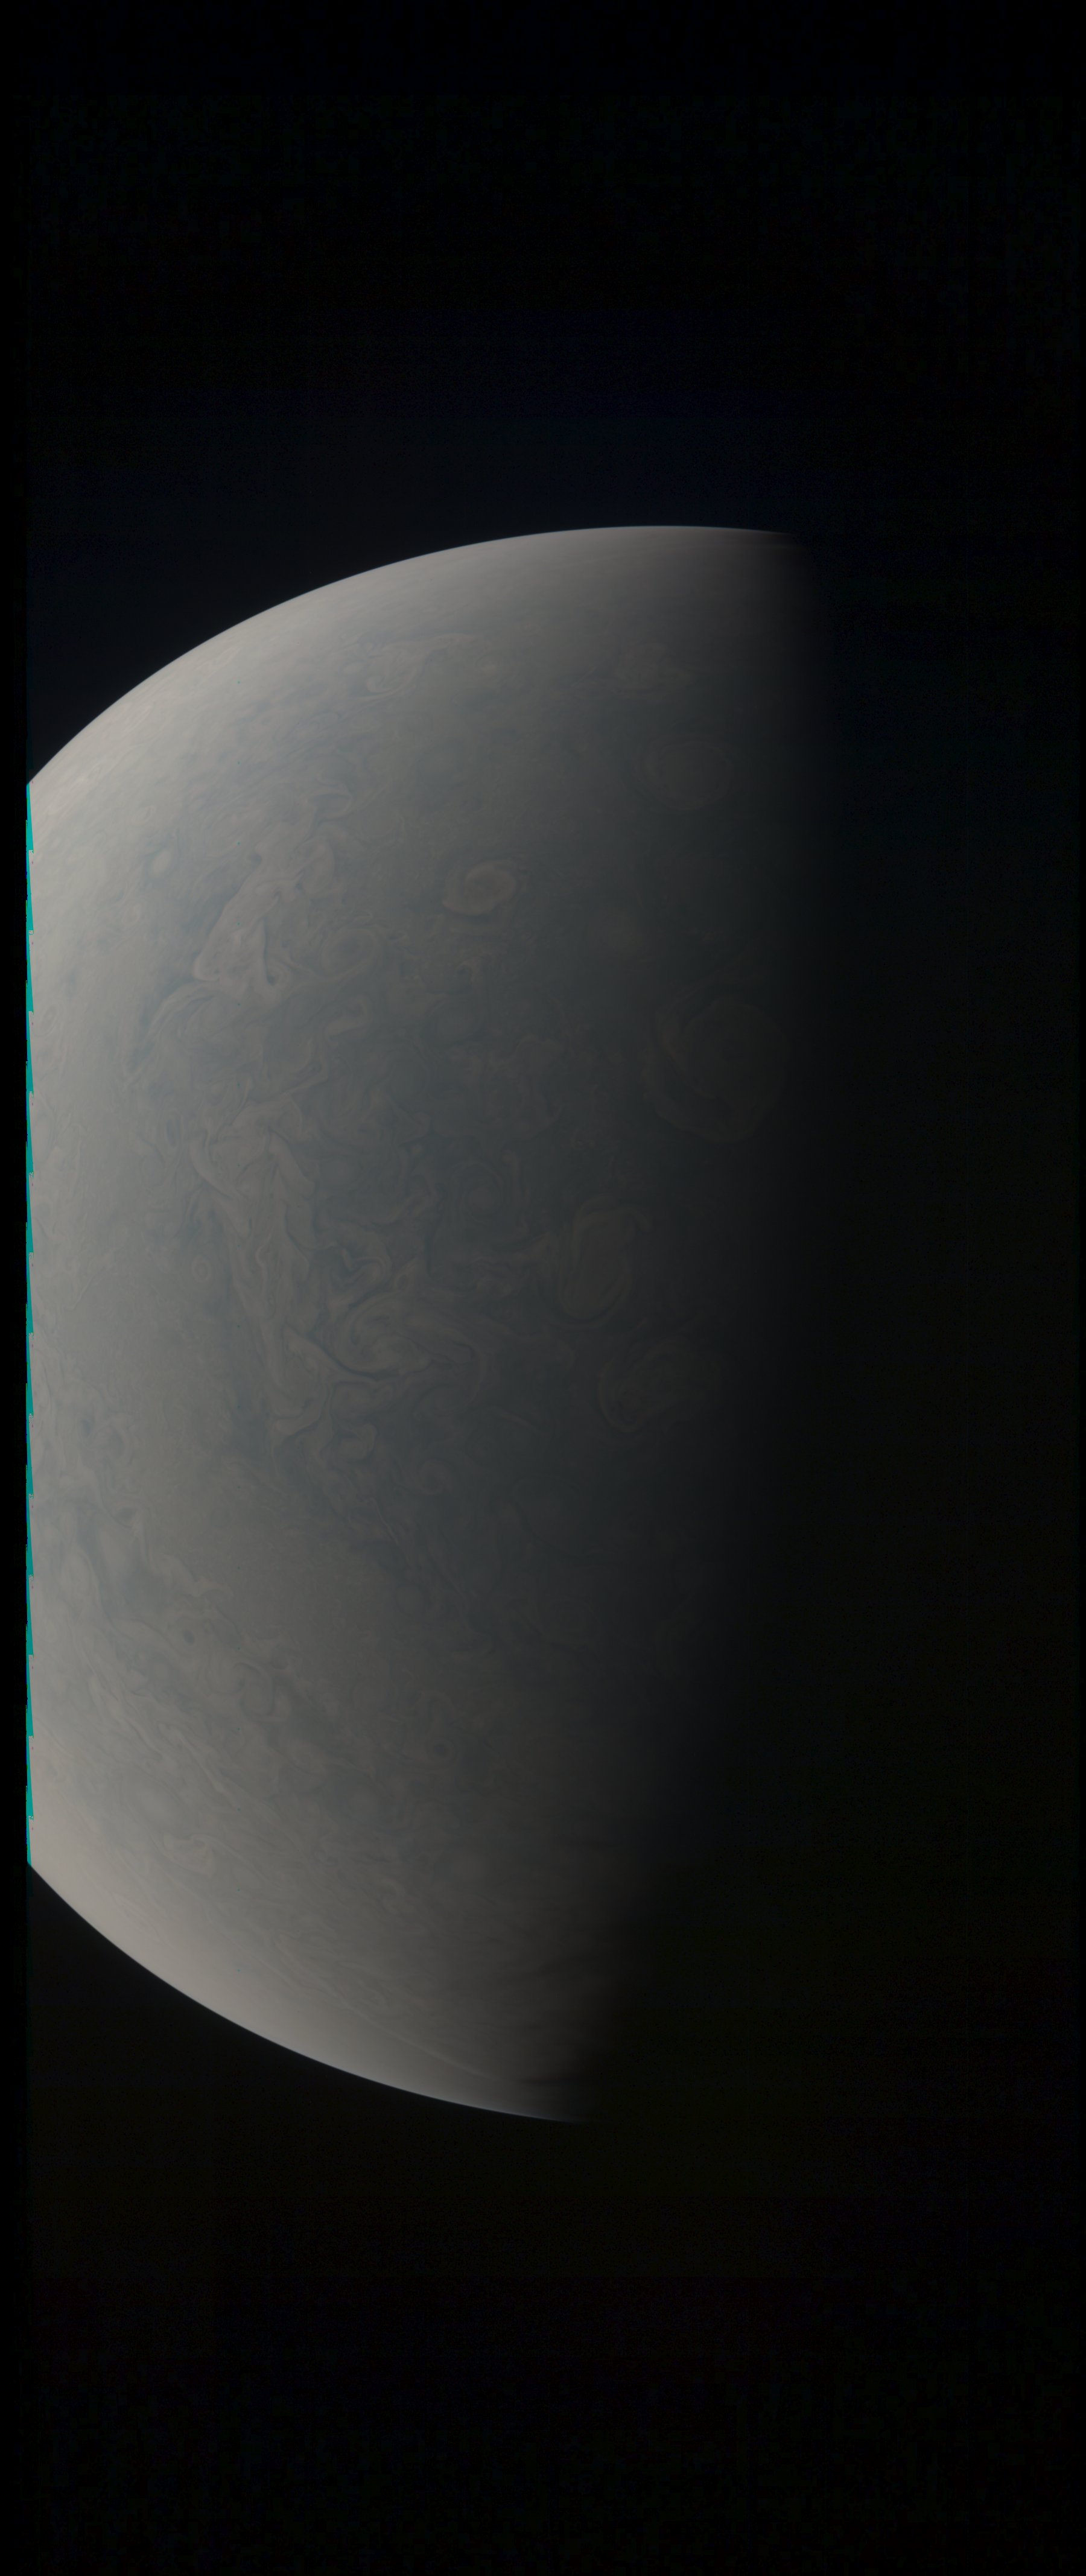 JNCE_2019043_18C00024_V01-raw_proc_hollow_sphere_c_pj_out.BMP_thumbnail_.png